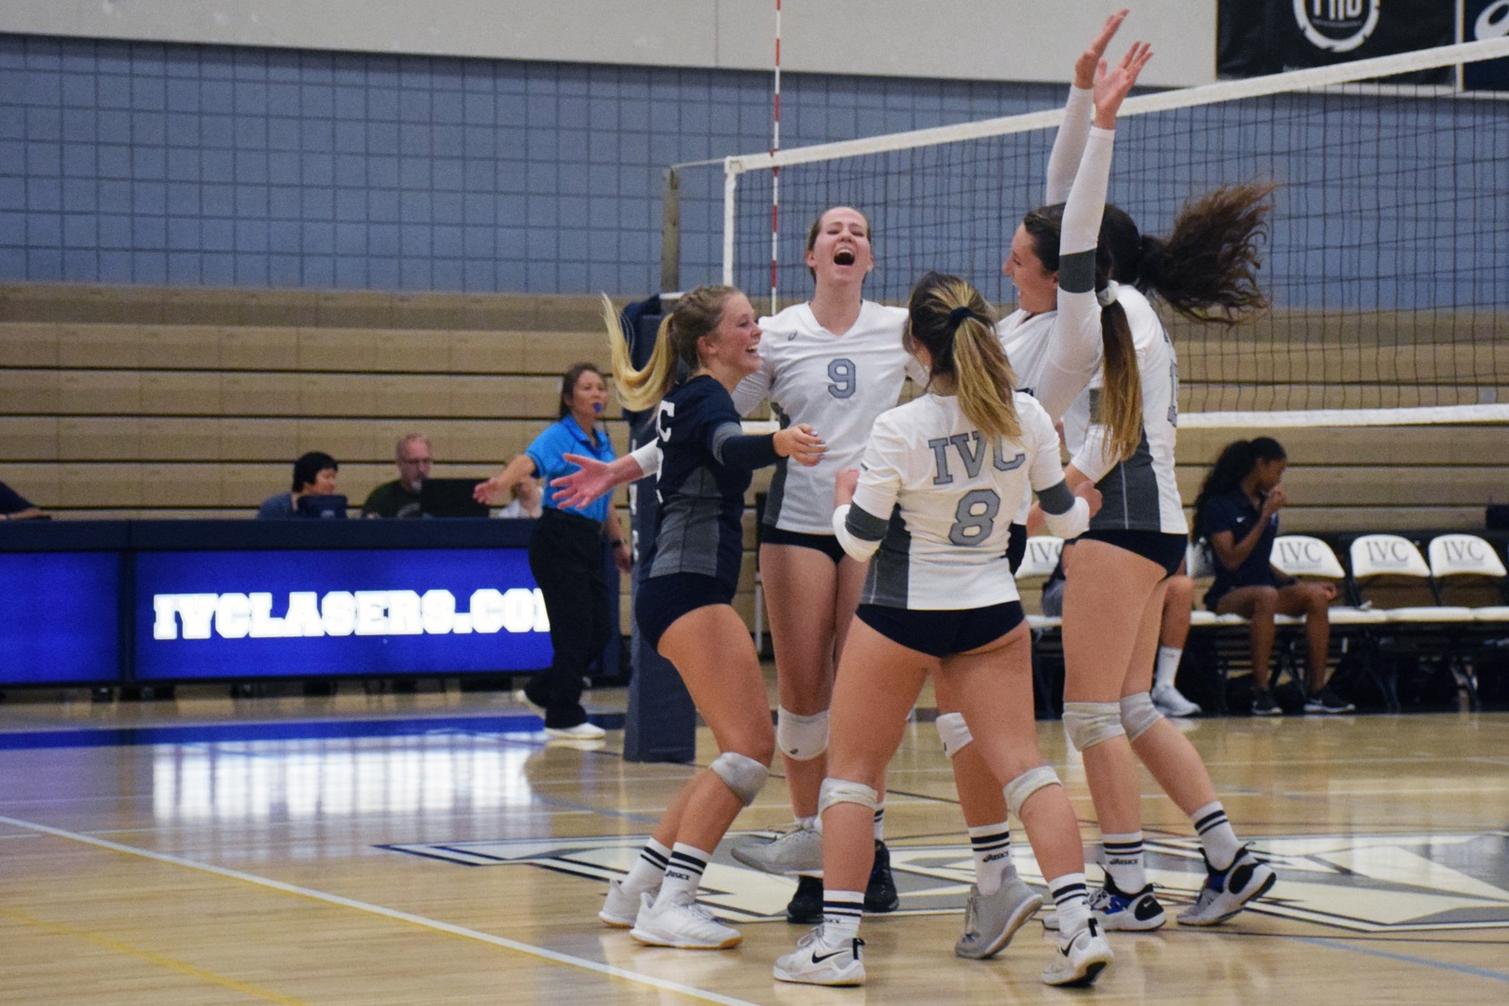 Women's volleyball team goes to 7-0 with win over MiraCosta